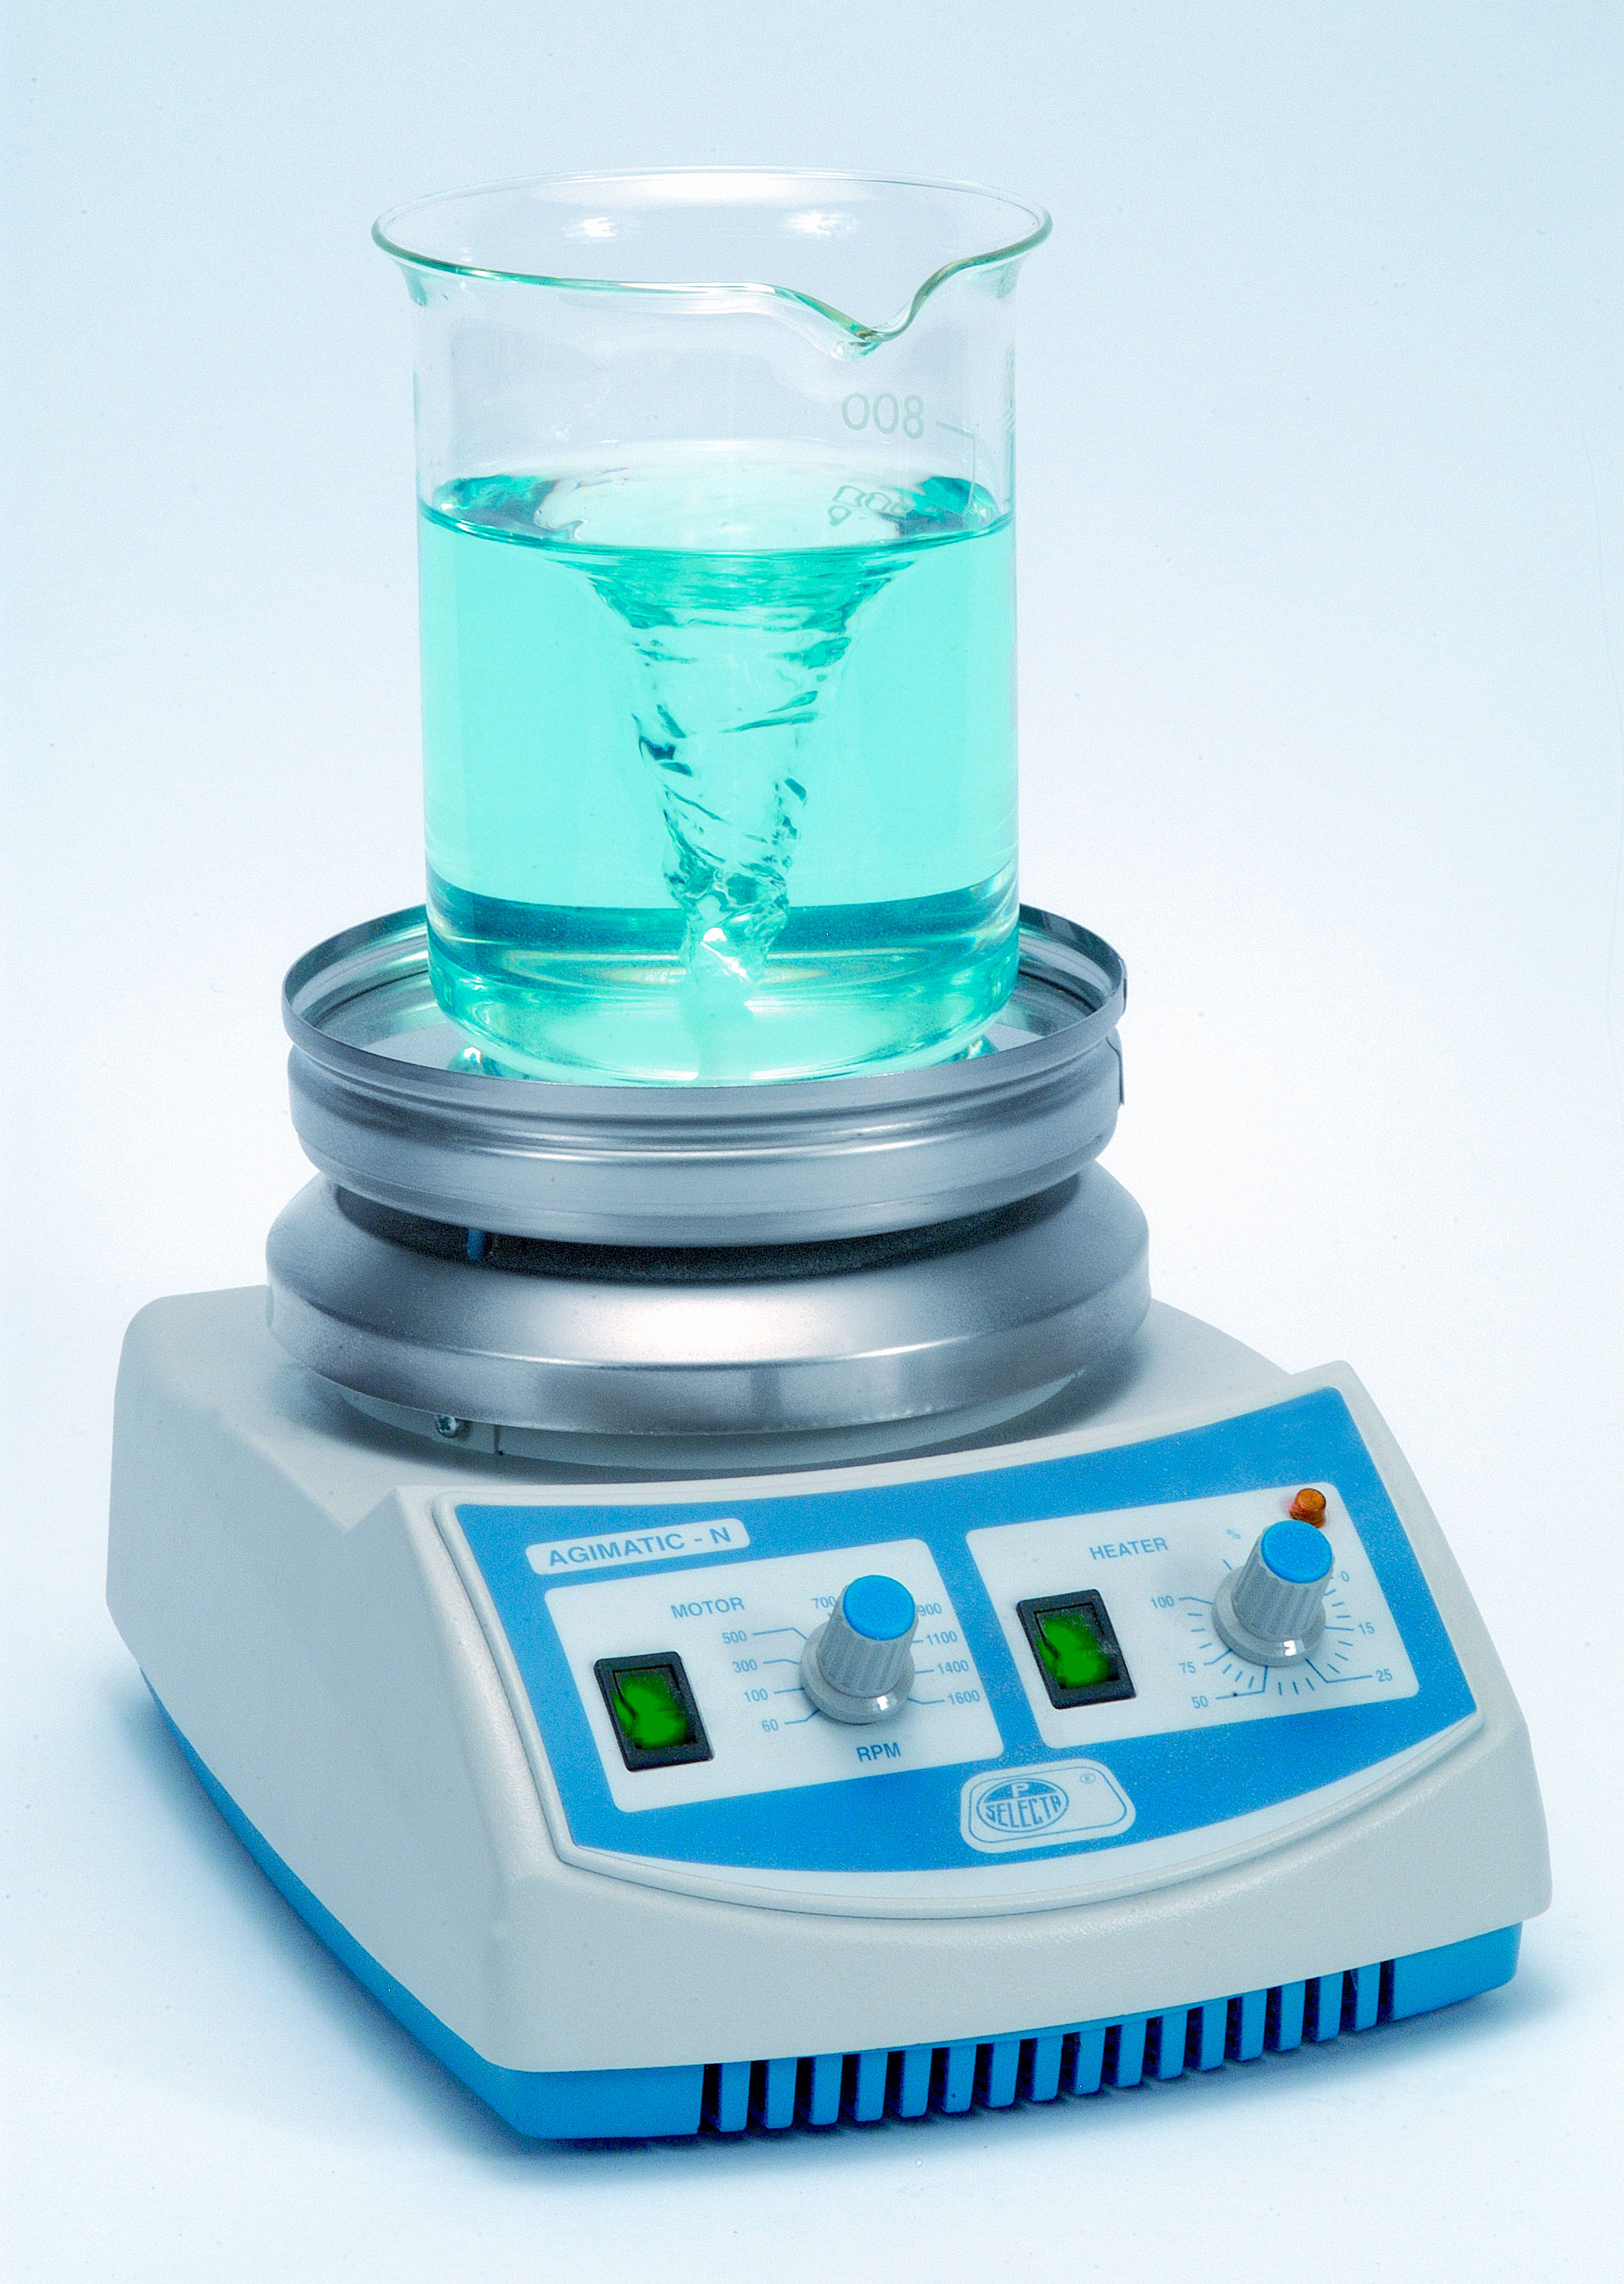 Magnetic Stirrer Agimatic-N with heating. J.P. SELECTA®. Speed (rpm): 60-1600. Stirring volume (l): Up to 10. Temp. (ºC): Up to 350. Material: Stainless steel. Ø plate (mm): 145. Dim. WxHxD (mm): 190x145x260. Power (W): 550. Weight (Kg): 3,2